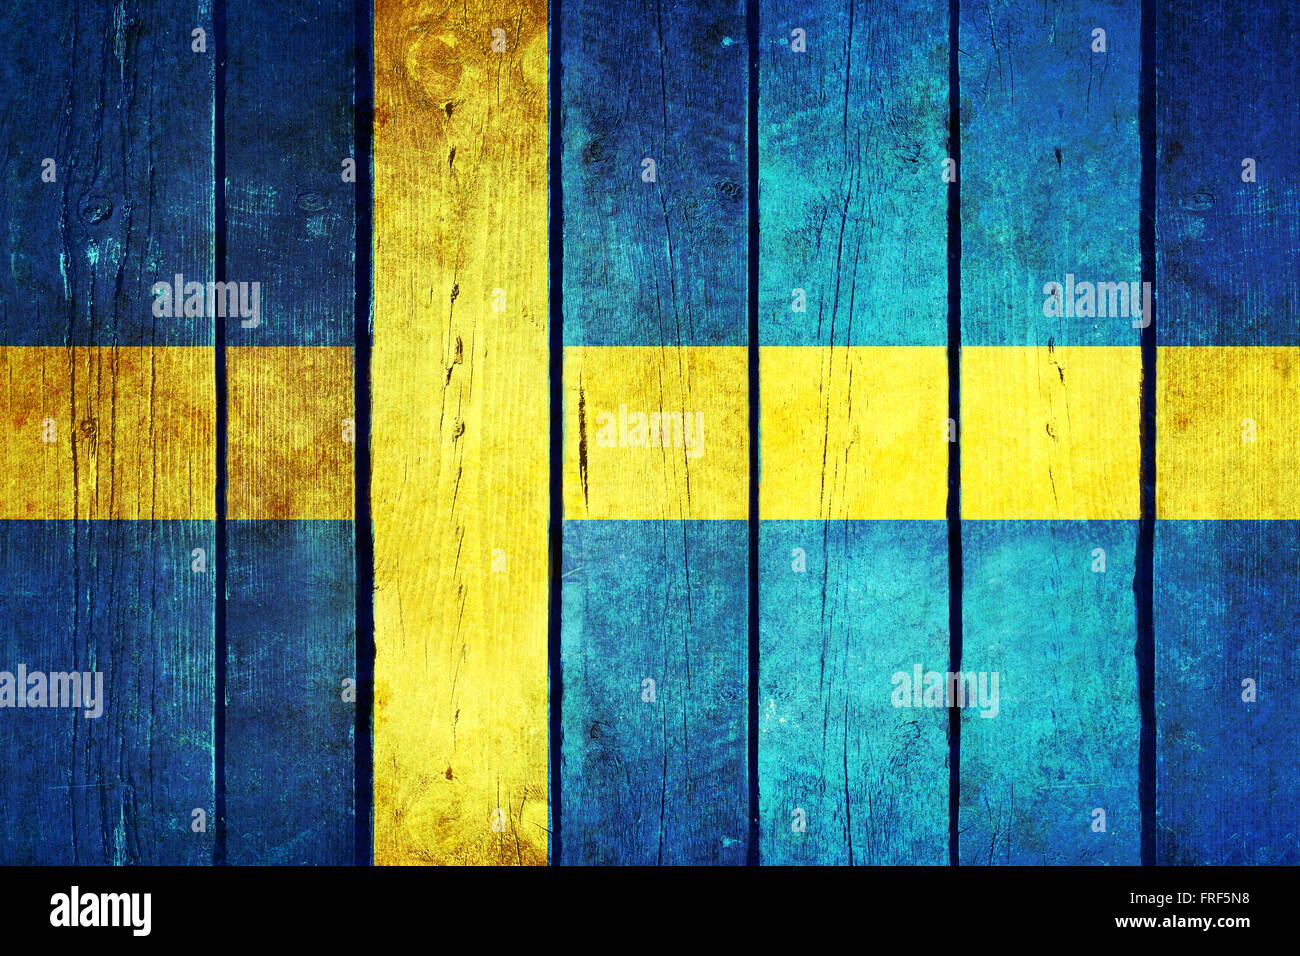 Sweden wooden grunge flag. Sweden flag painted on the old wooden planks. Vintage retro picture from my collection of flags. Stock Photo